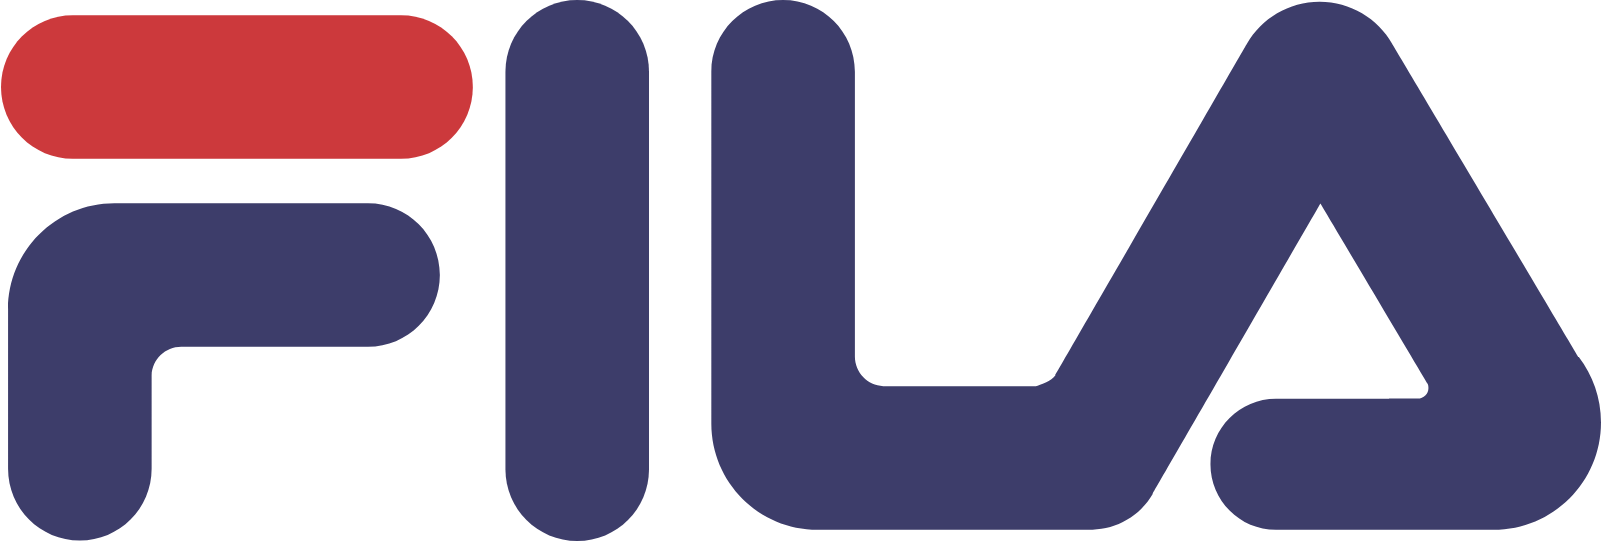 Fila logo in transparent PNG and vectorized SVG formats